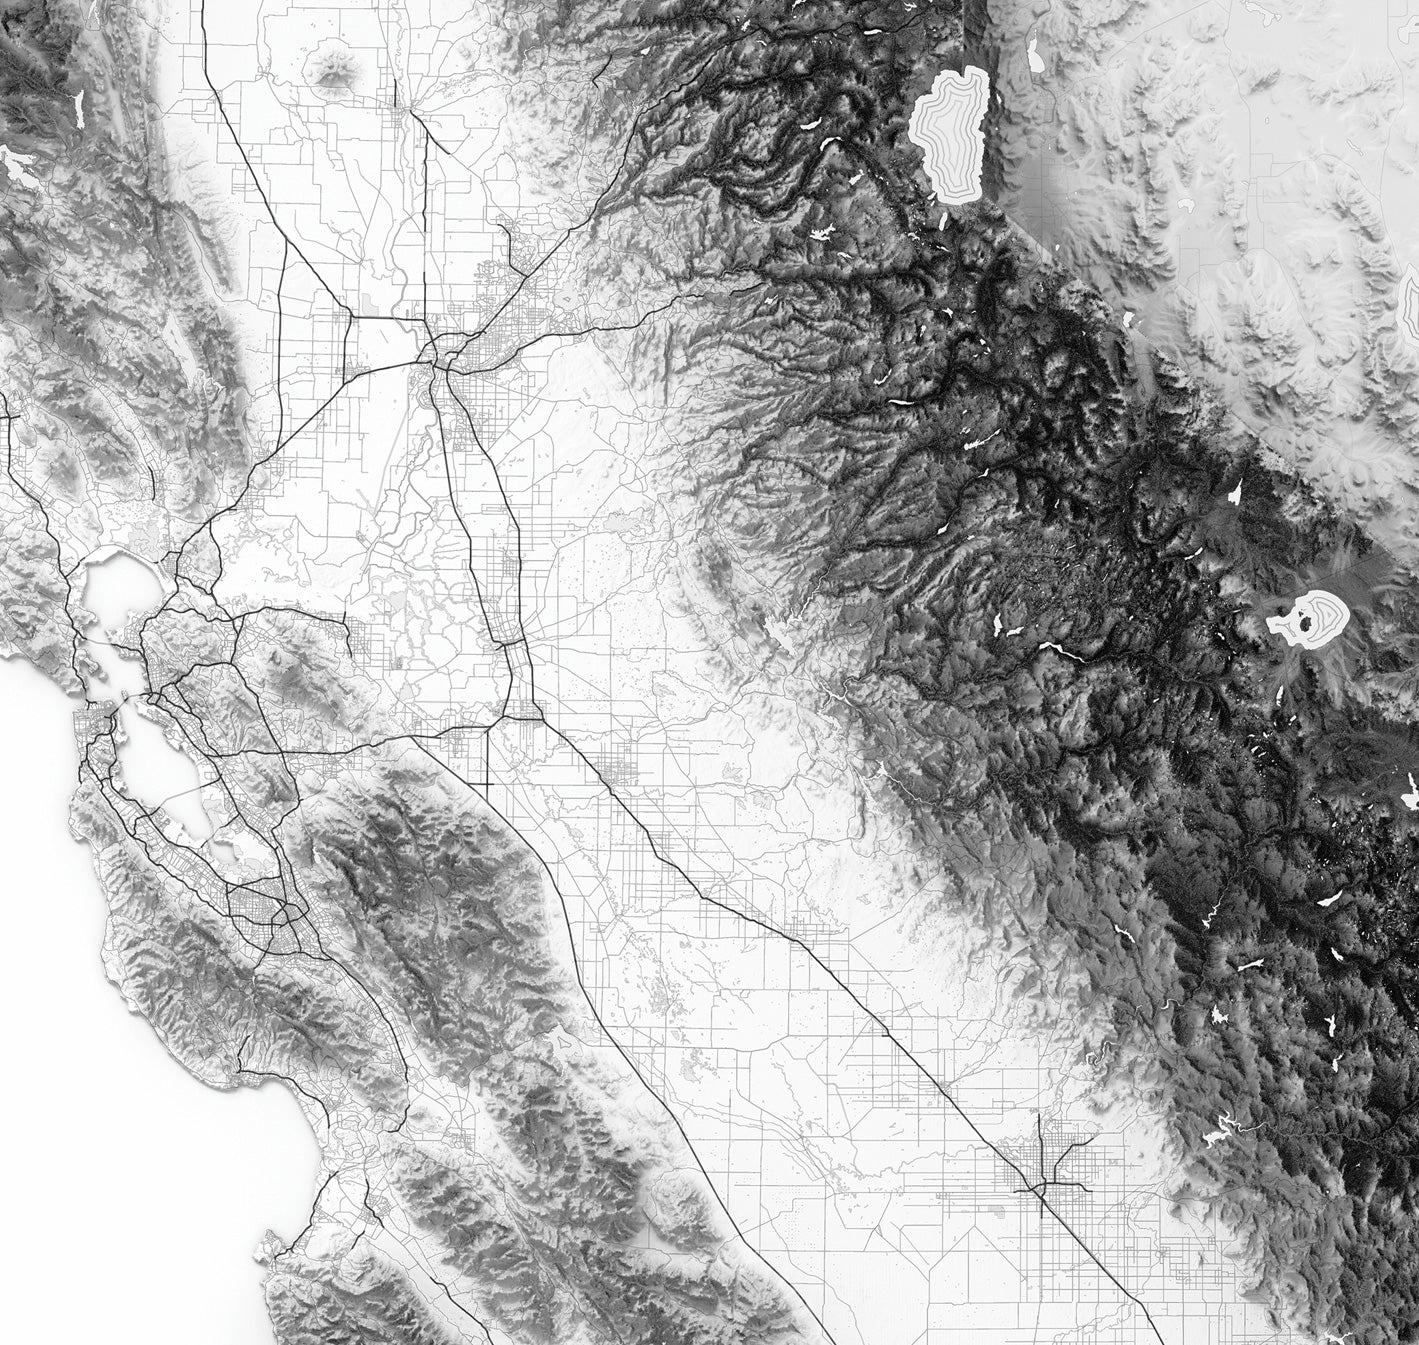 Detailed topographic relief and roads of california's central valley